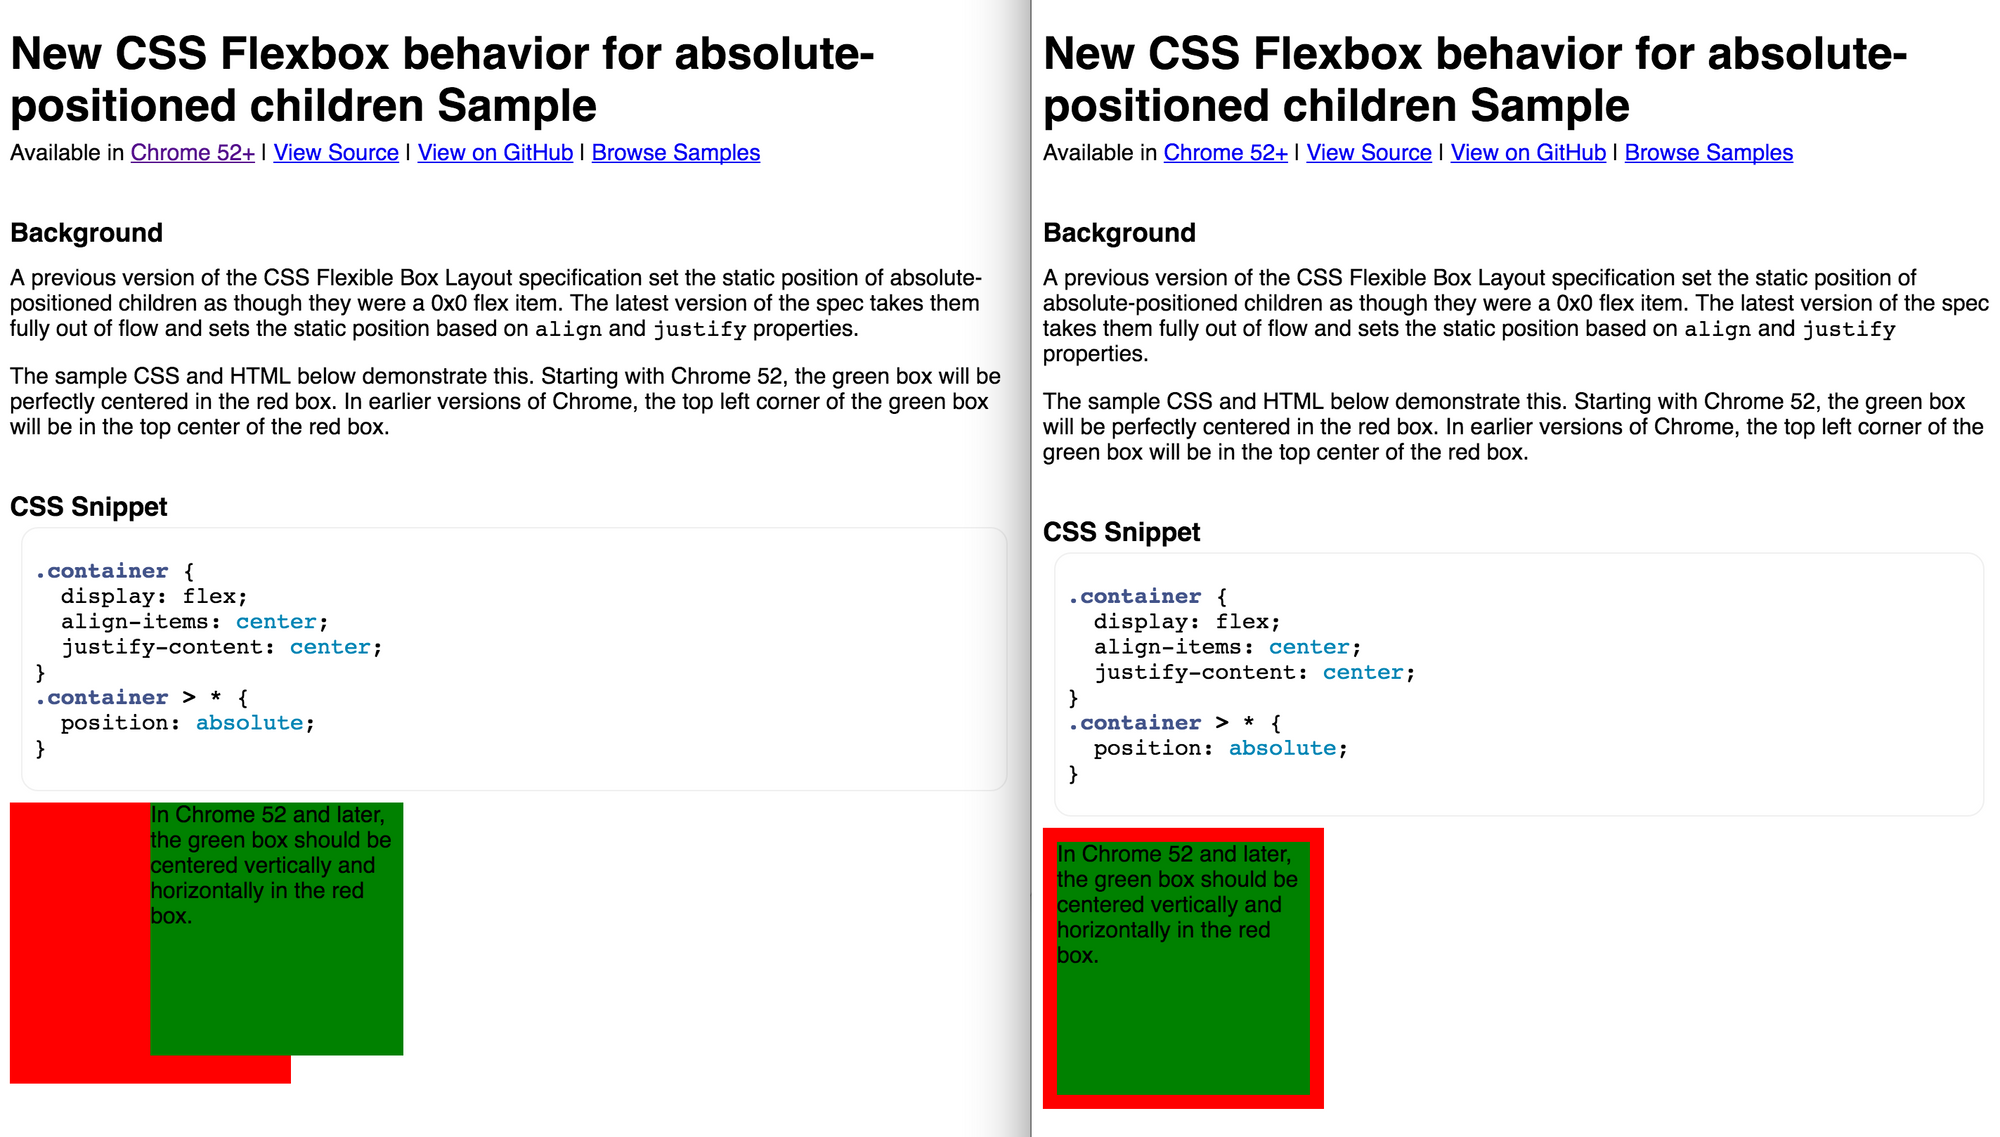 New CSS Flexbox behavior for absolute-positioned children